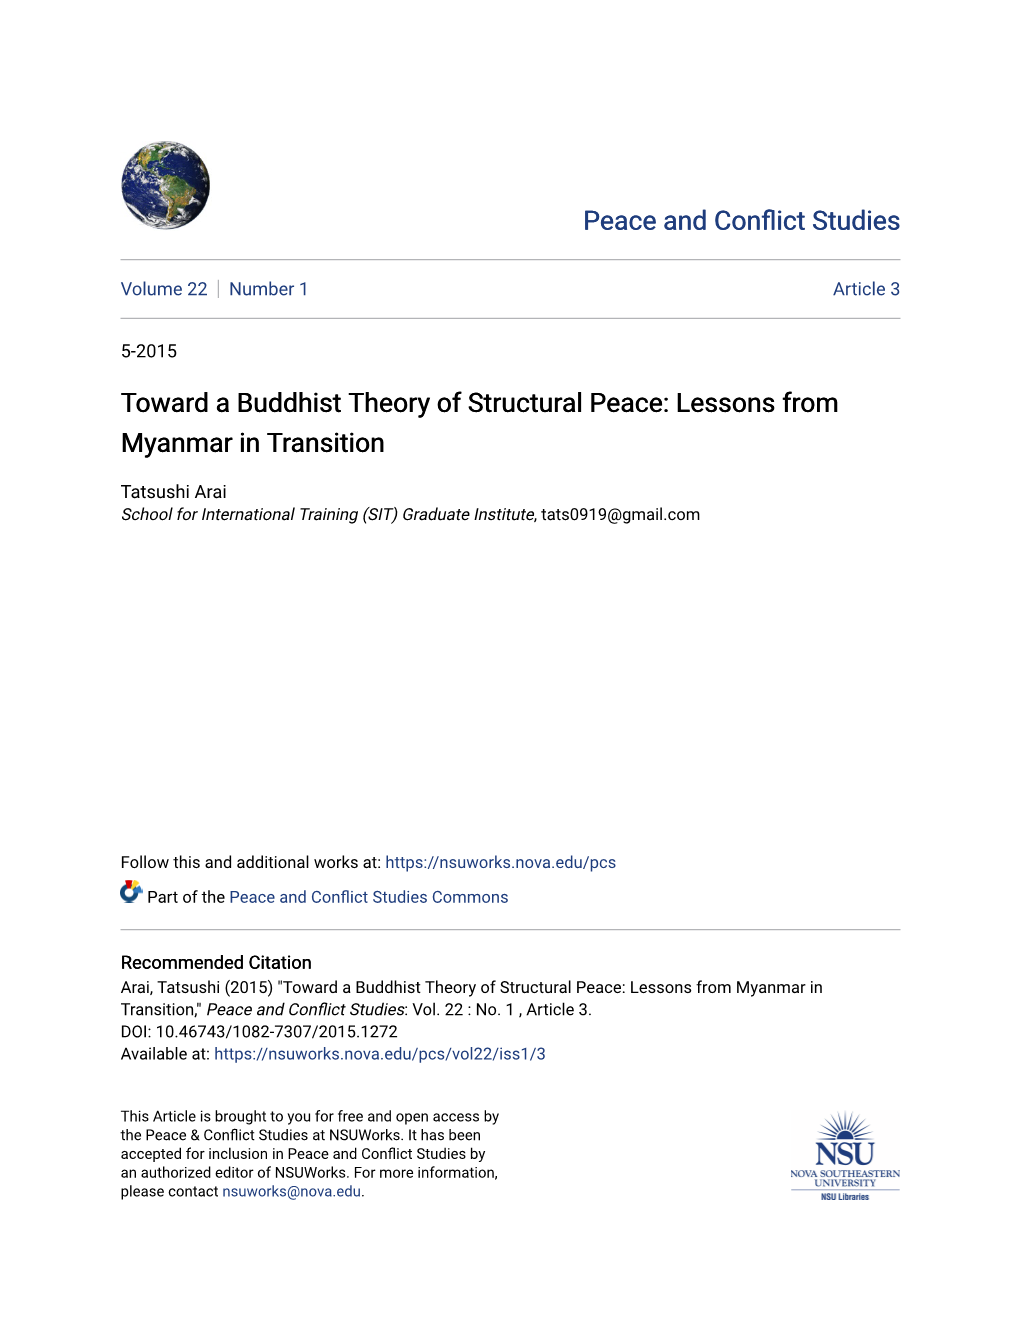 Toward a Buddhist Theory of Structural Peace: Lessons from Myanmar in Transition